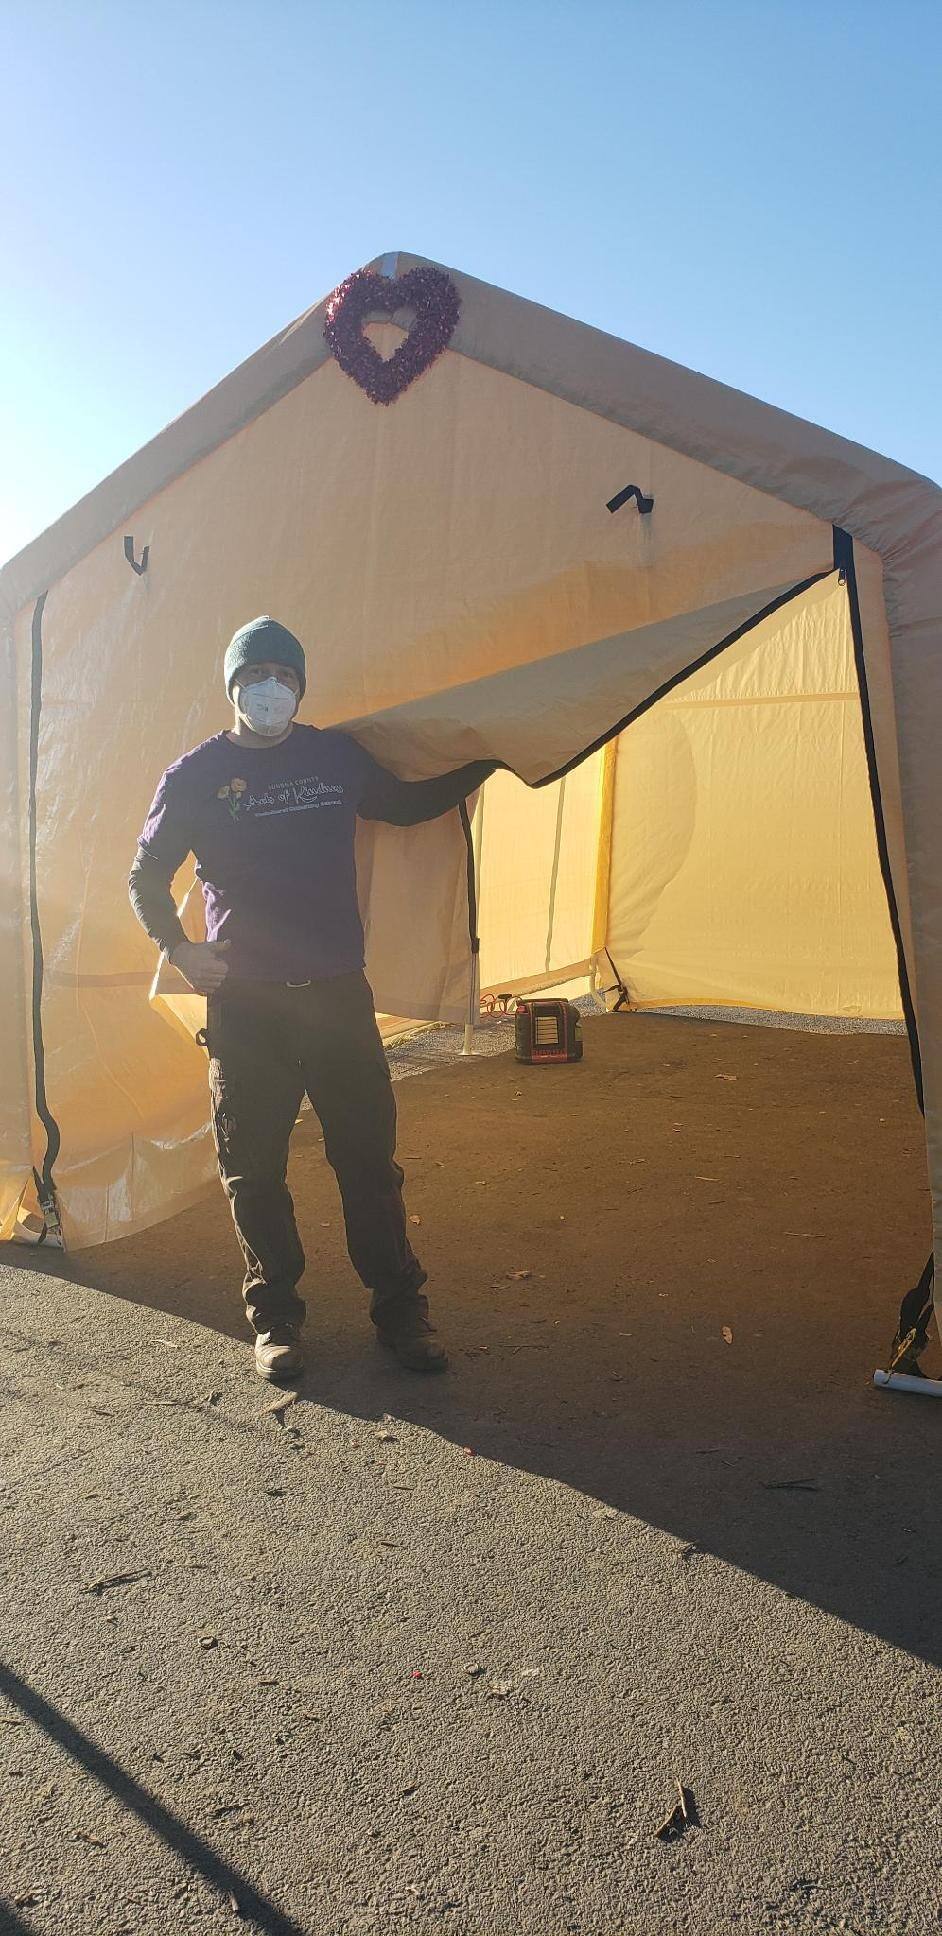 Miles Sarvis-Wilburn, 35, co-founder of the Squeaky Wheel Bicycle Coalition stands with one of the heated tents his organization has set up to help the homeless through the freezing temperatures.